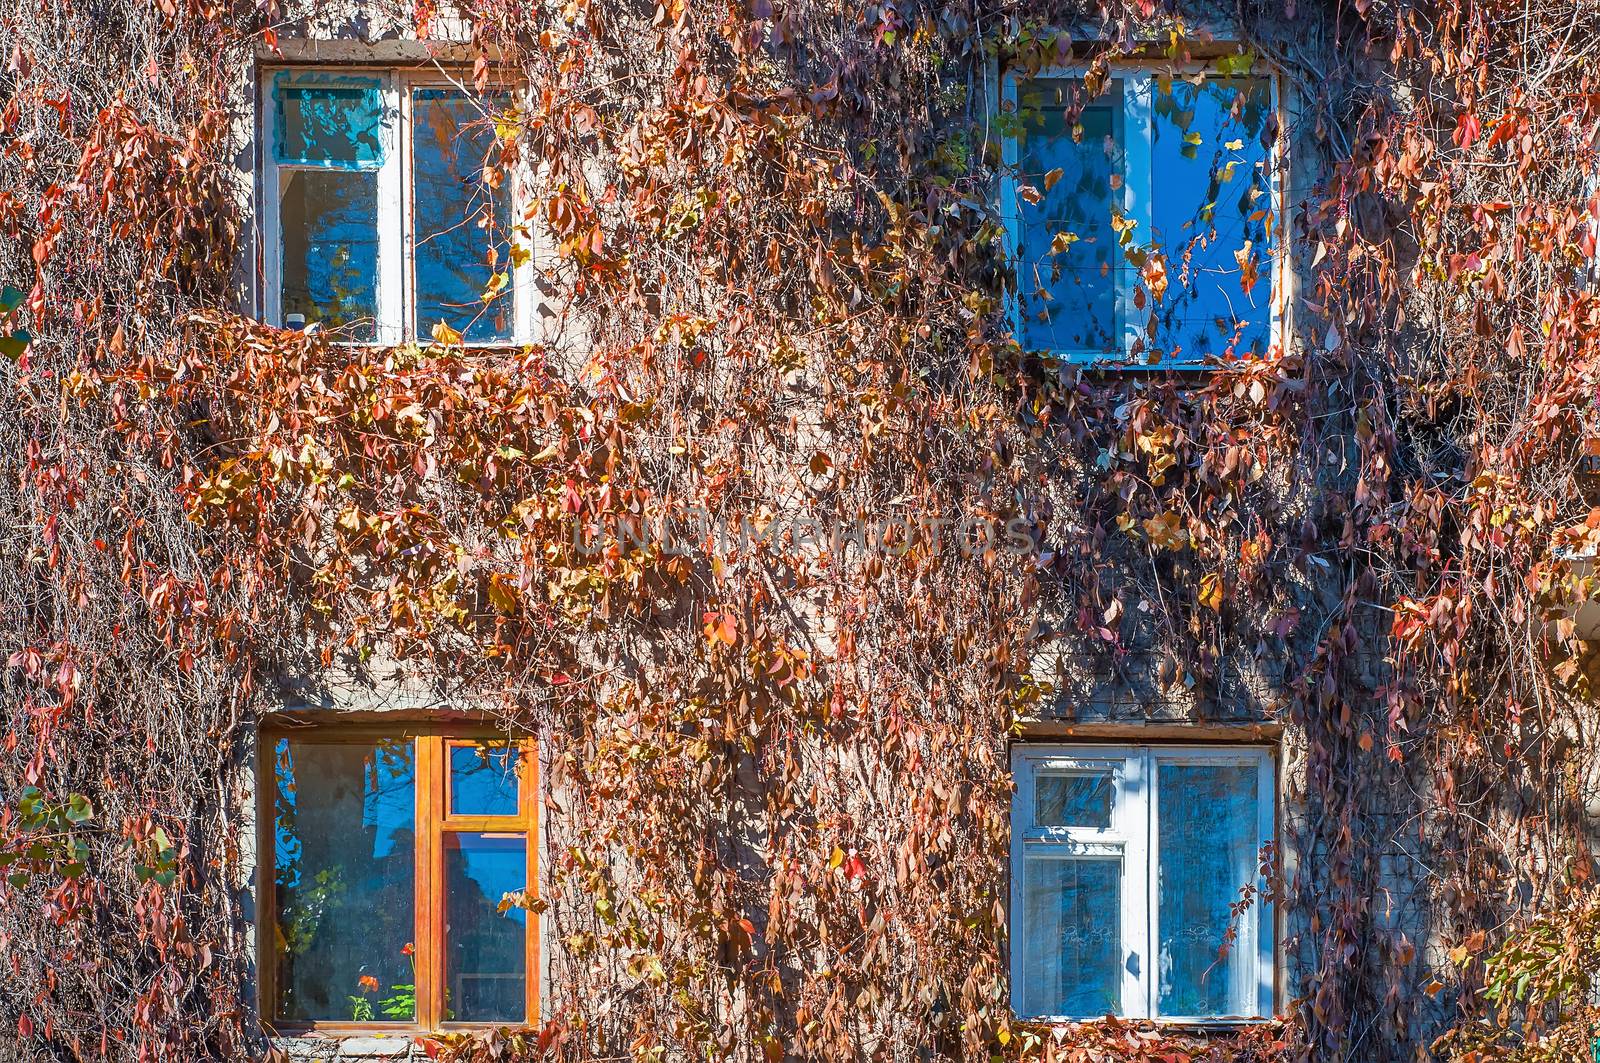 Facade of the house is braided with wild grapes. The vine in the fall, the windows of the house.